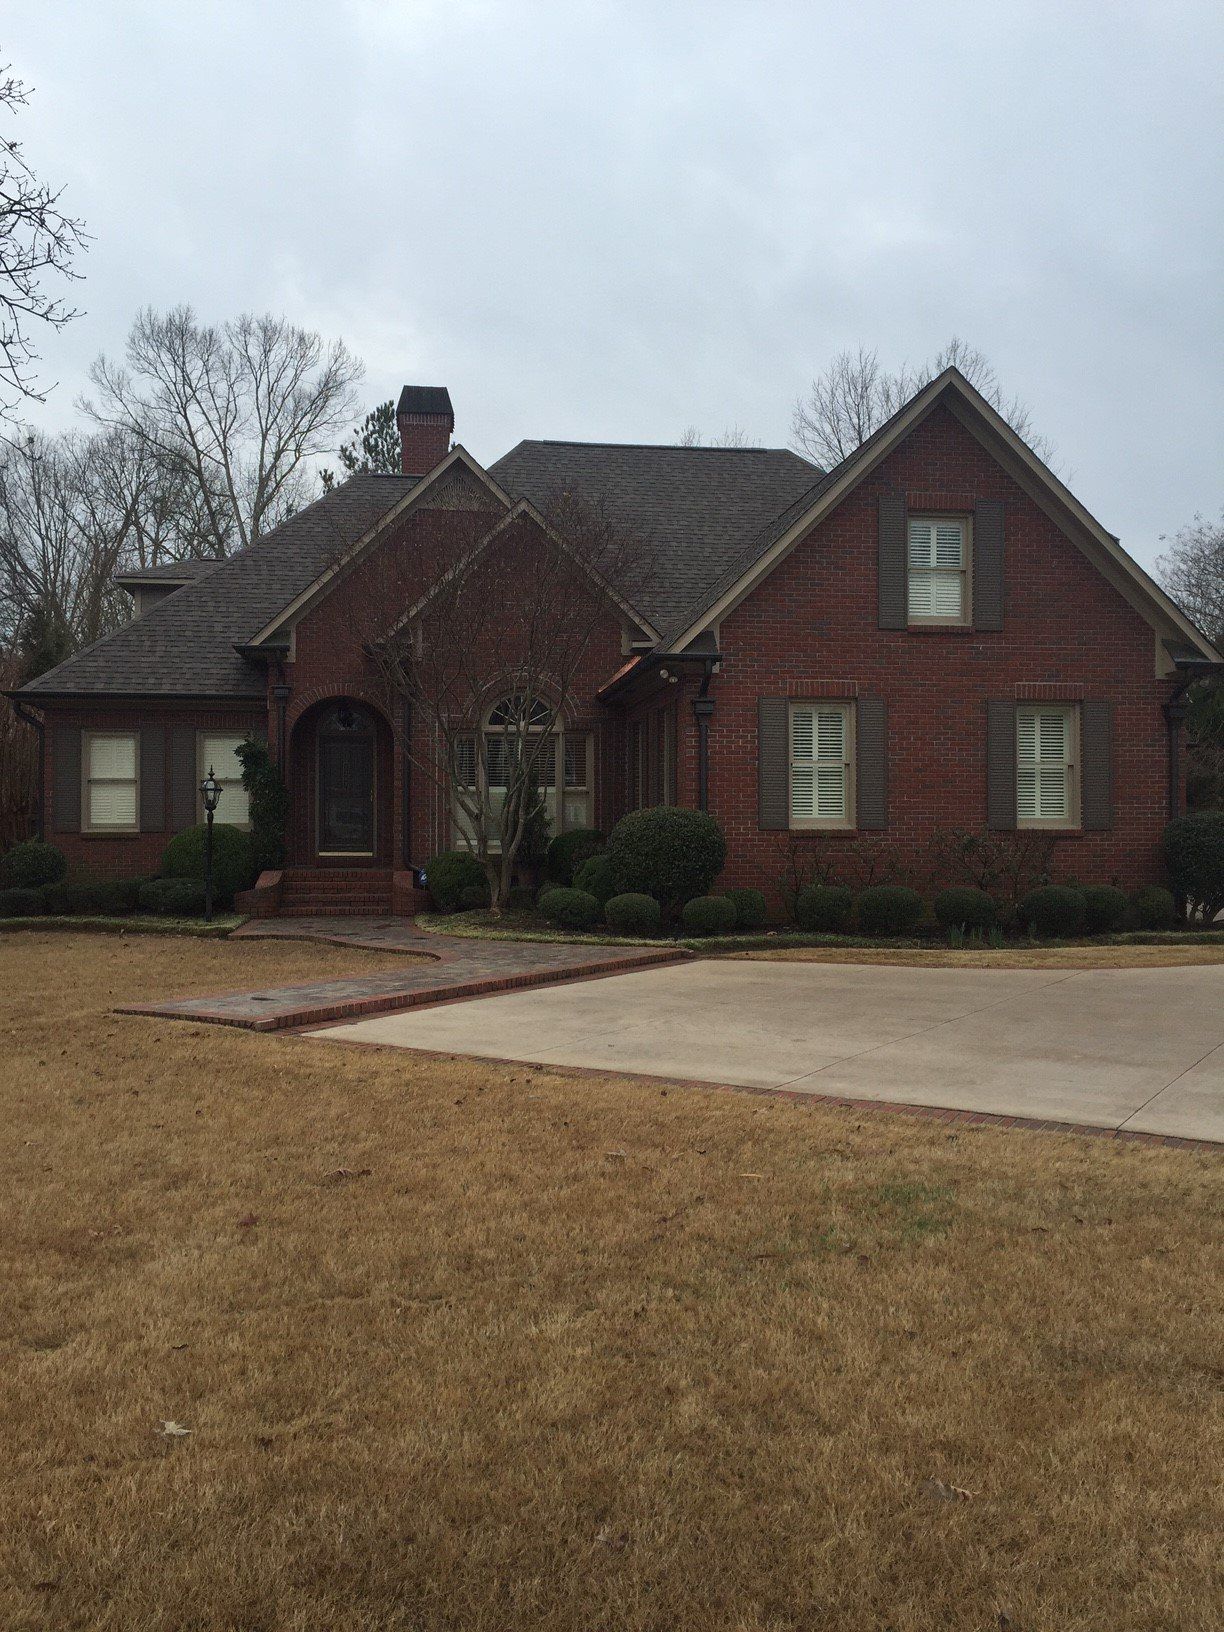 Beautiful brick home with new roof - B & B Roofing in Decatur, AL